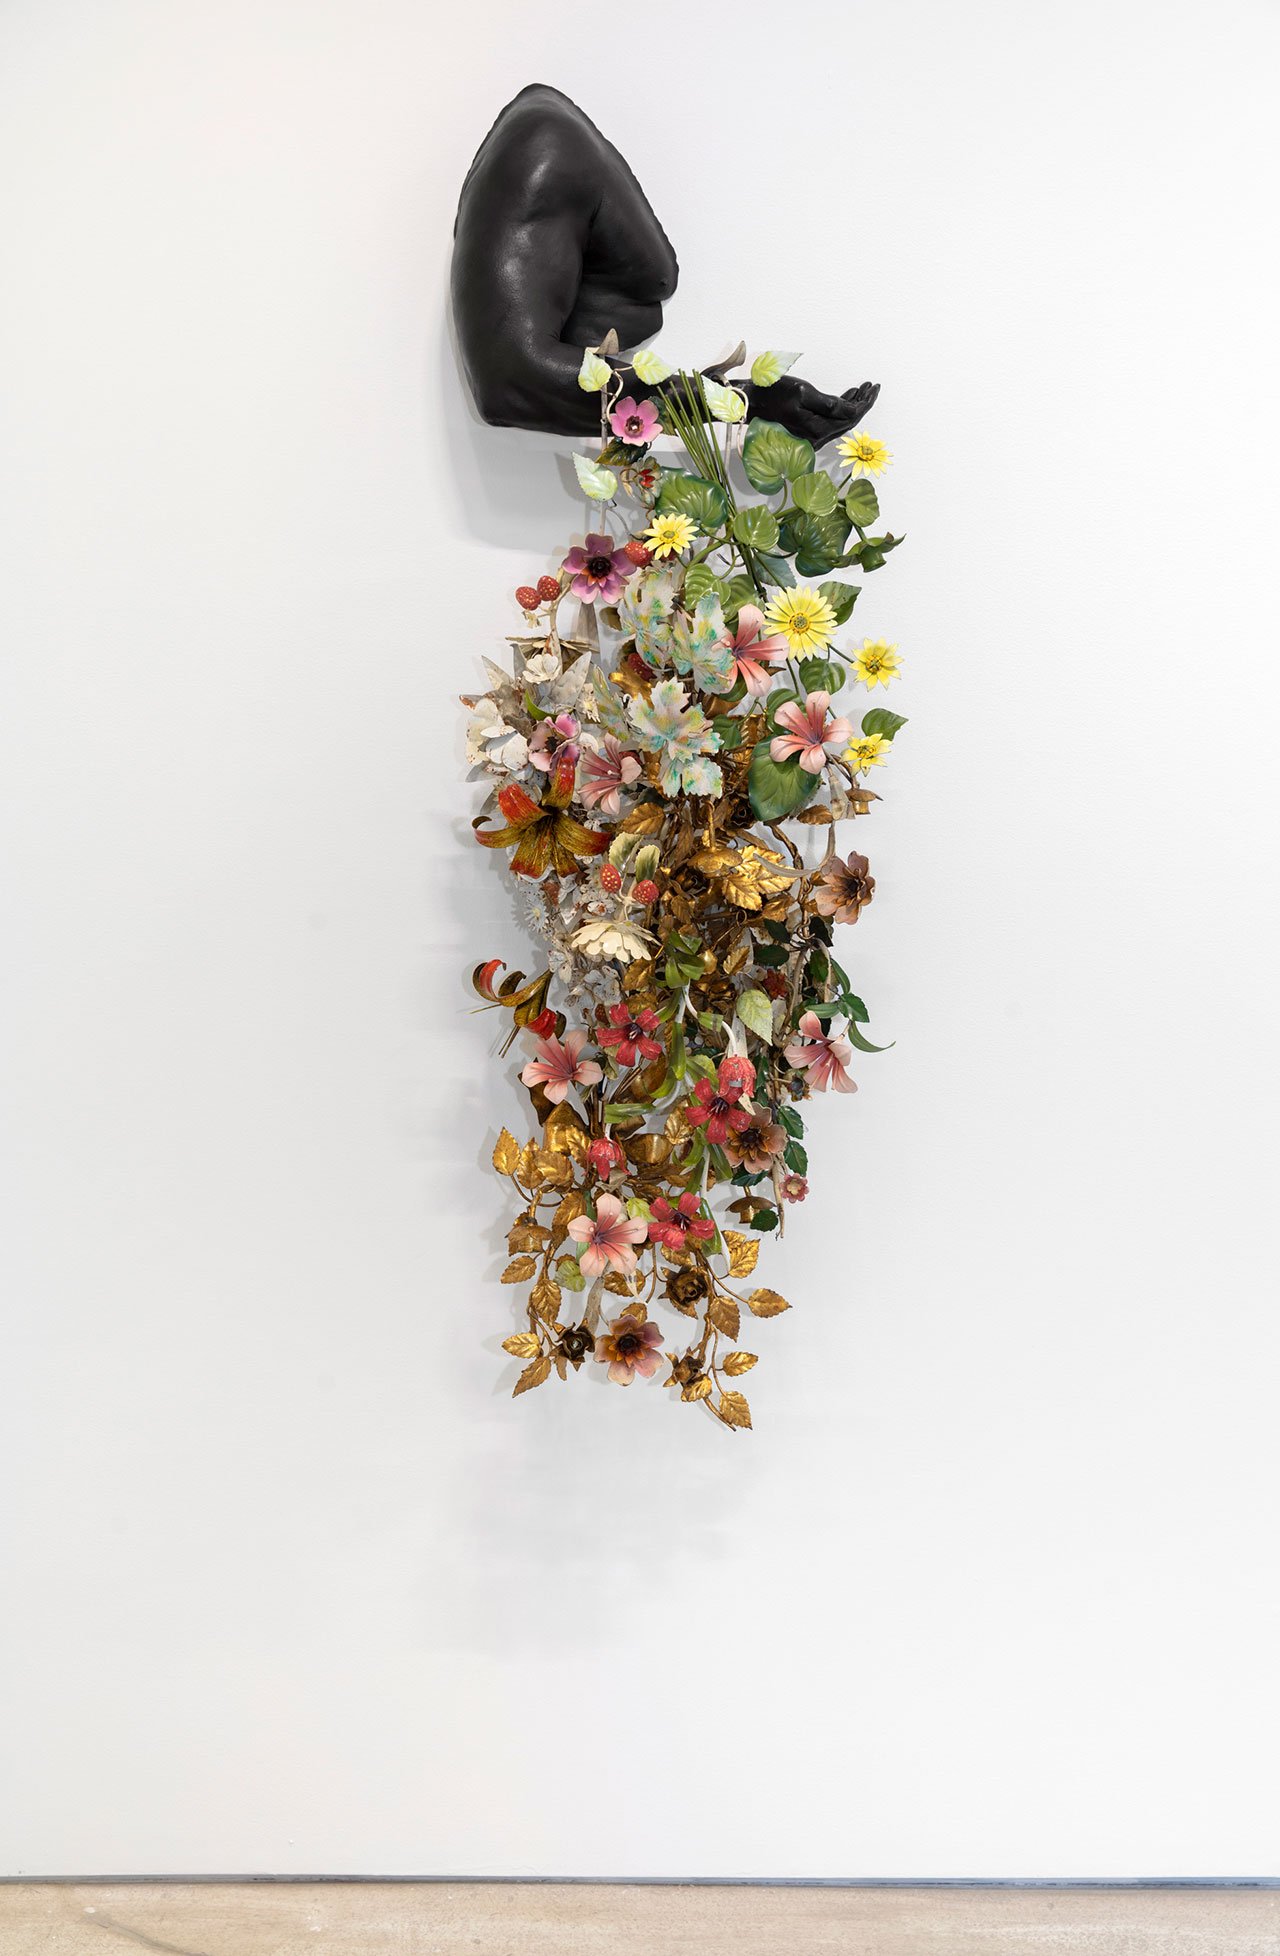 Nick Cave, Arm Peace, 2018. Cast bronze and vintage tole flowers. 57 1/2 x 19 3/8 x 13 1/2 in. © Nick Cave. Courtesy of the artist and Jack Shainman Gallery, New York.